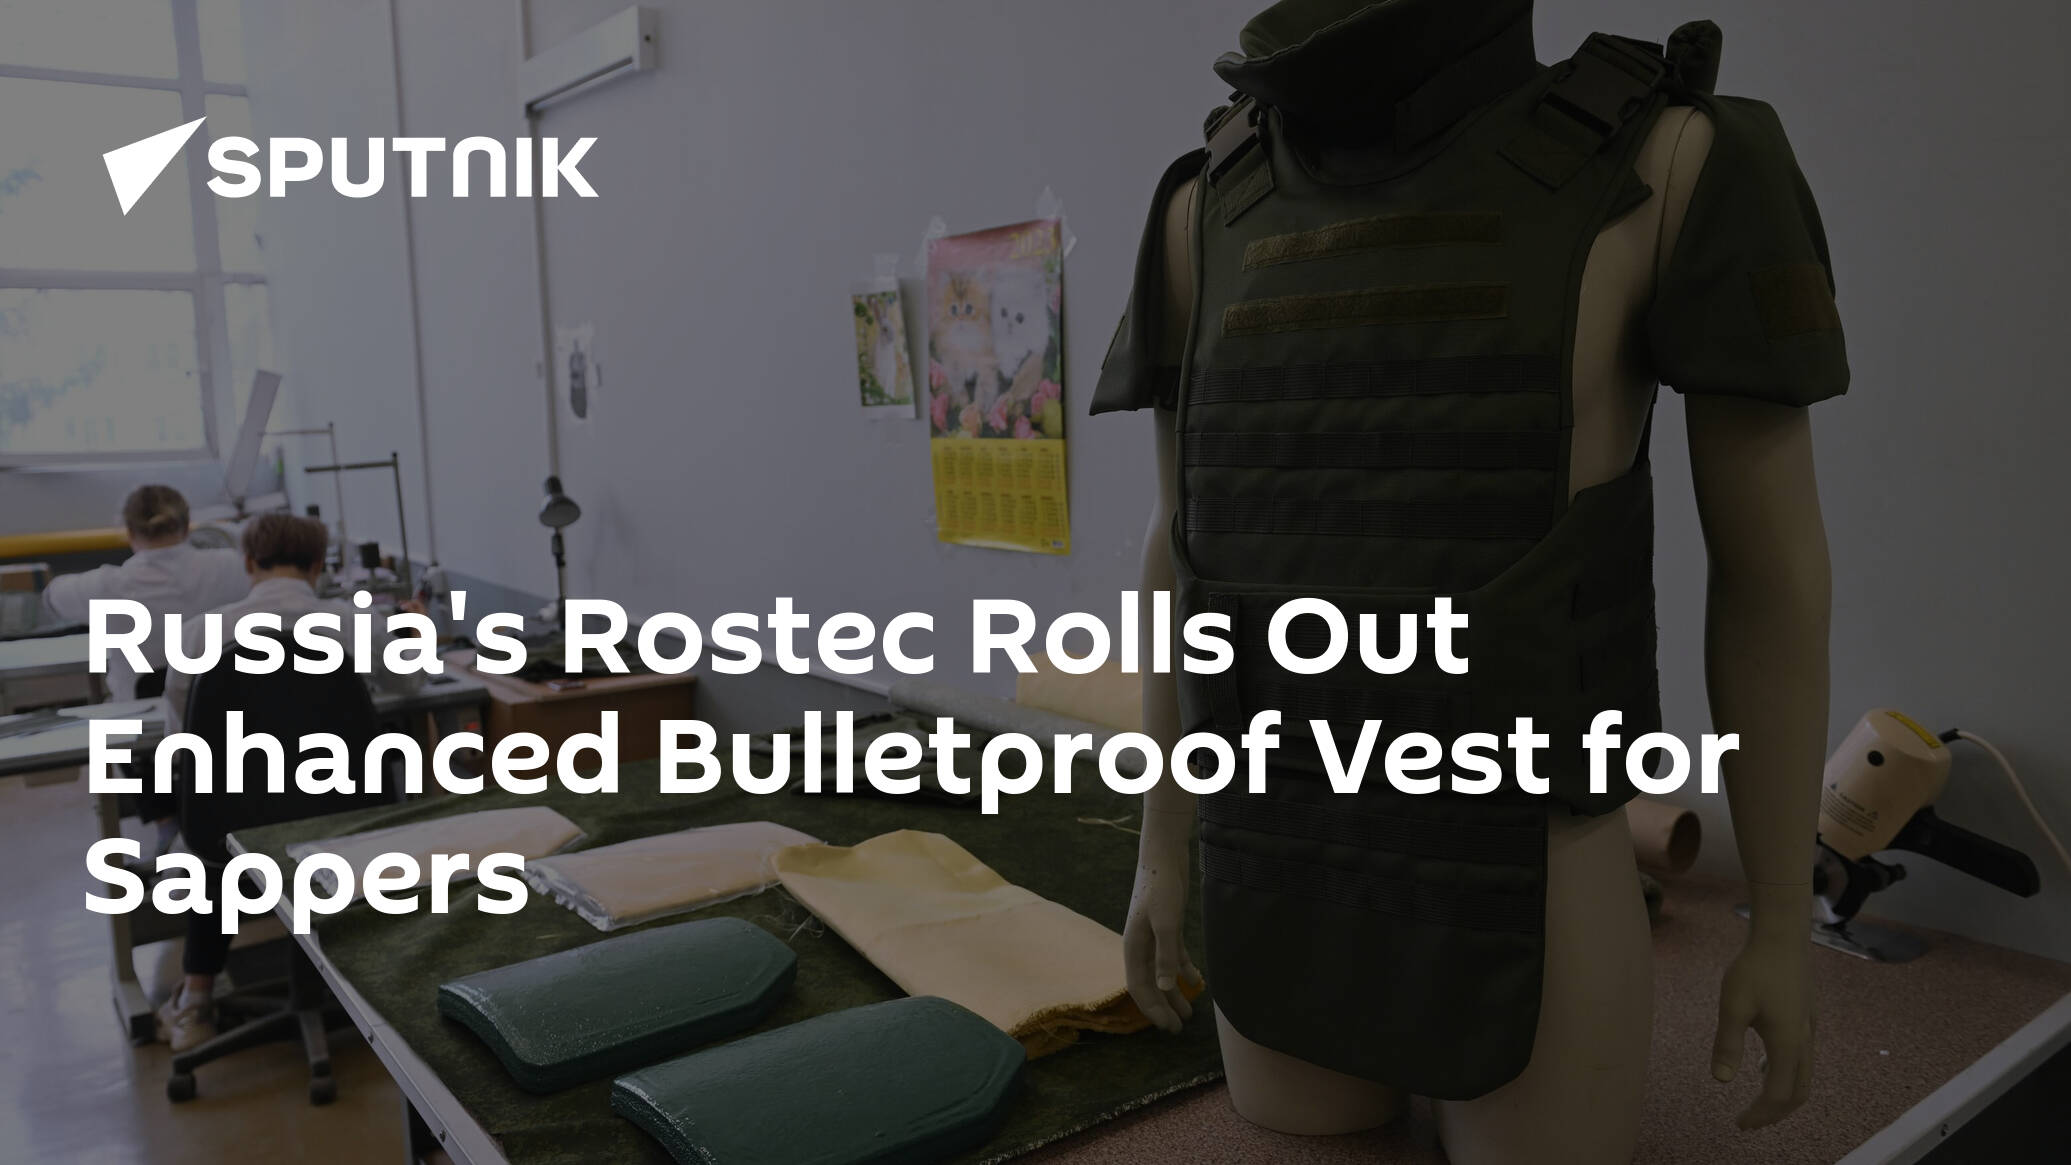 Russia's Rostec Rolls Out Enhanced Bulletproof Vest for Sappers